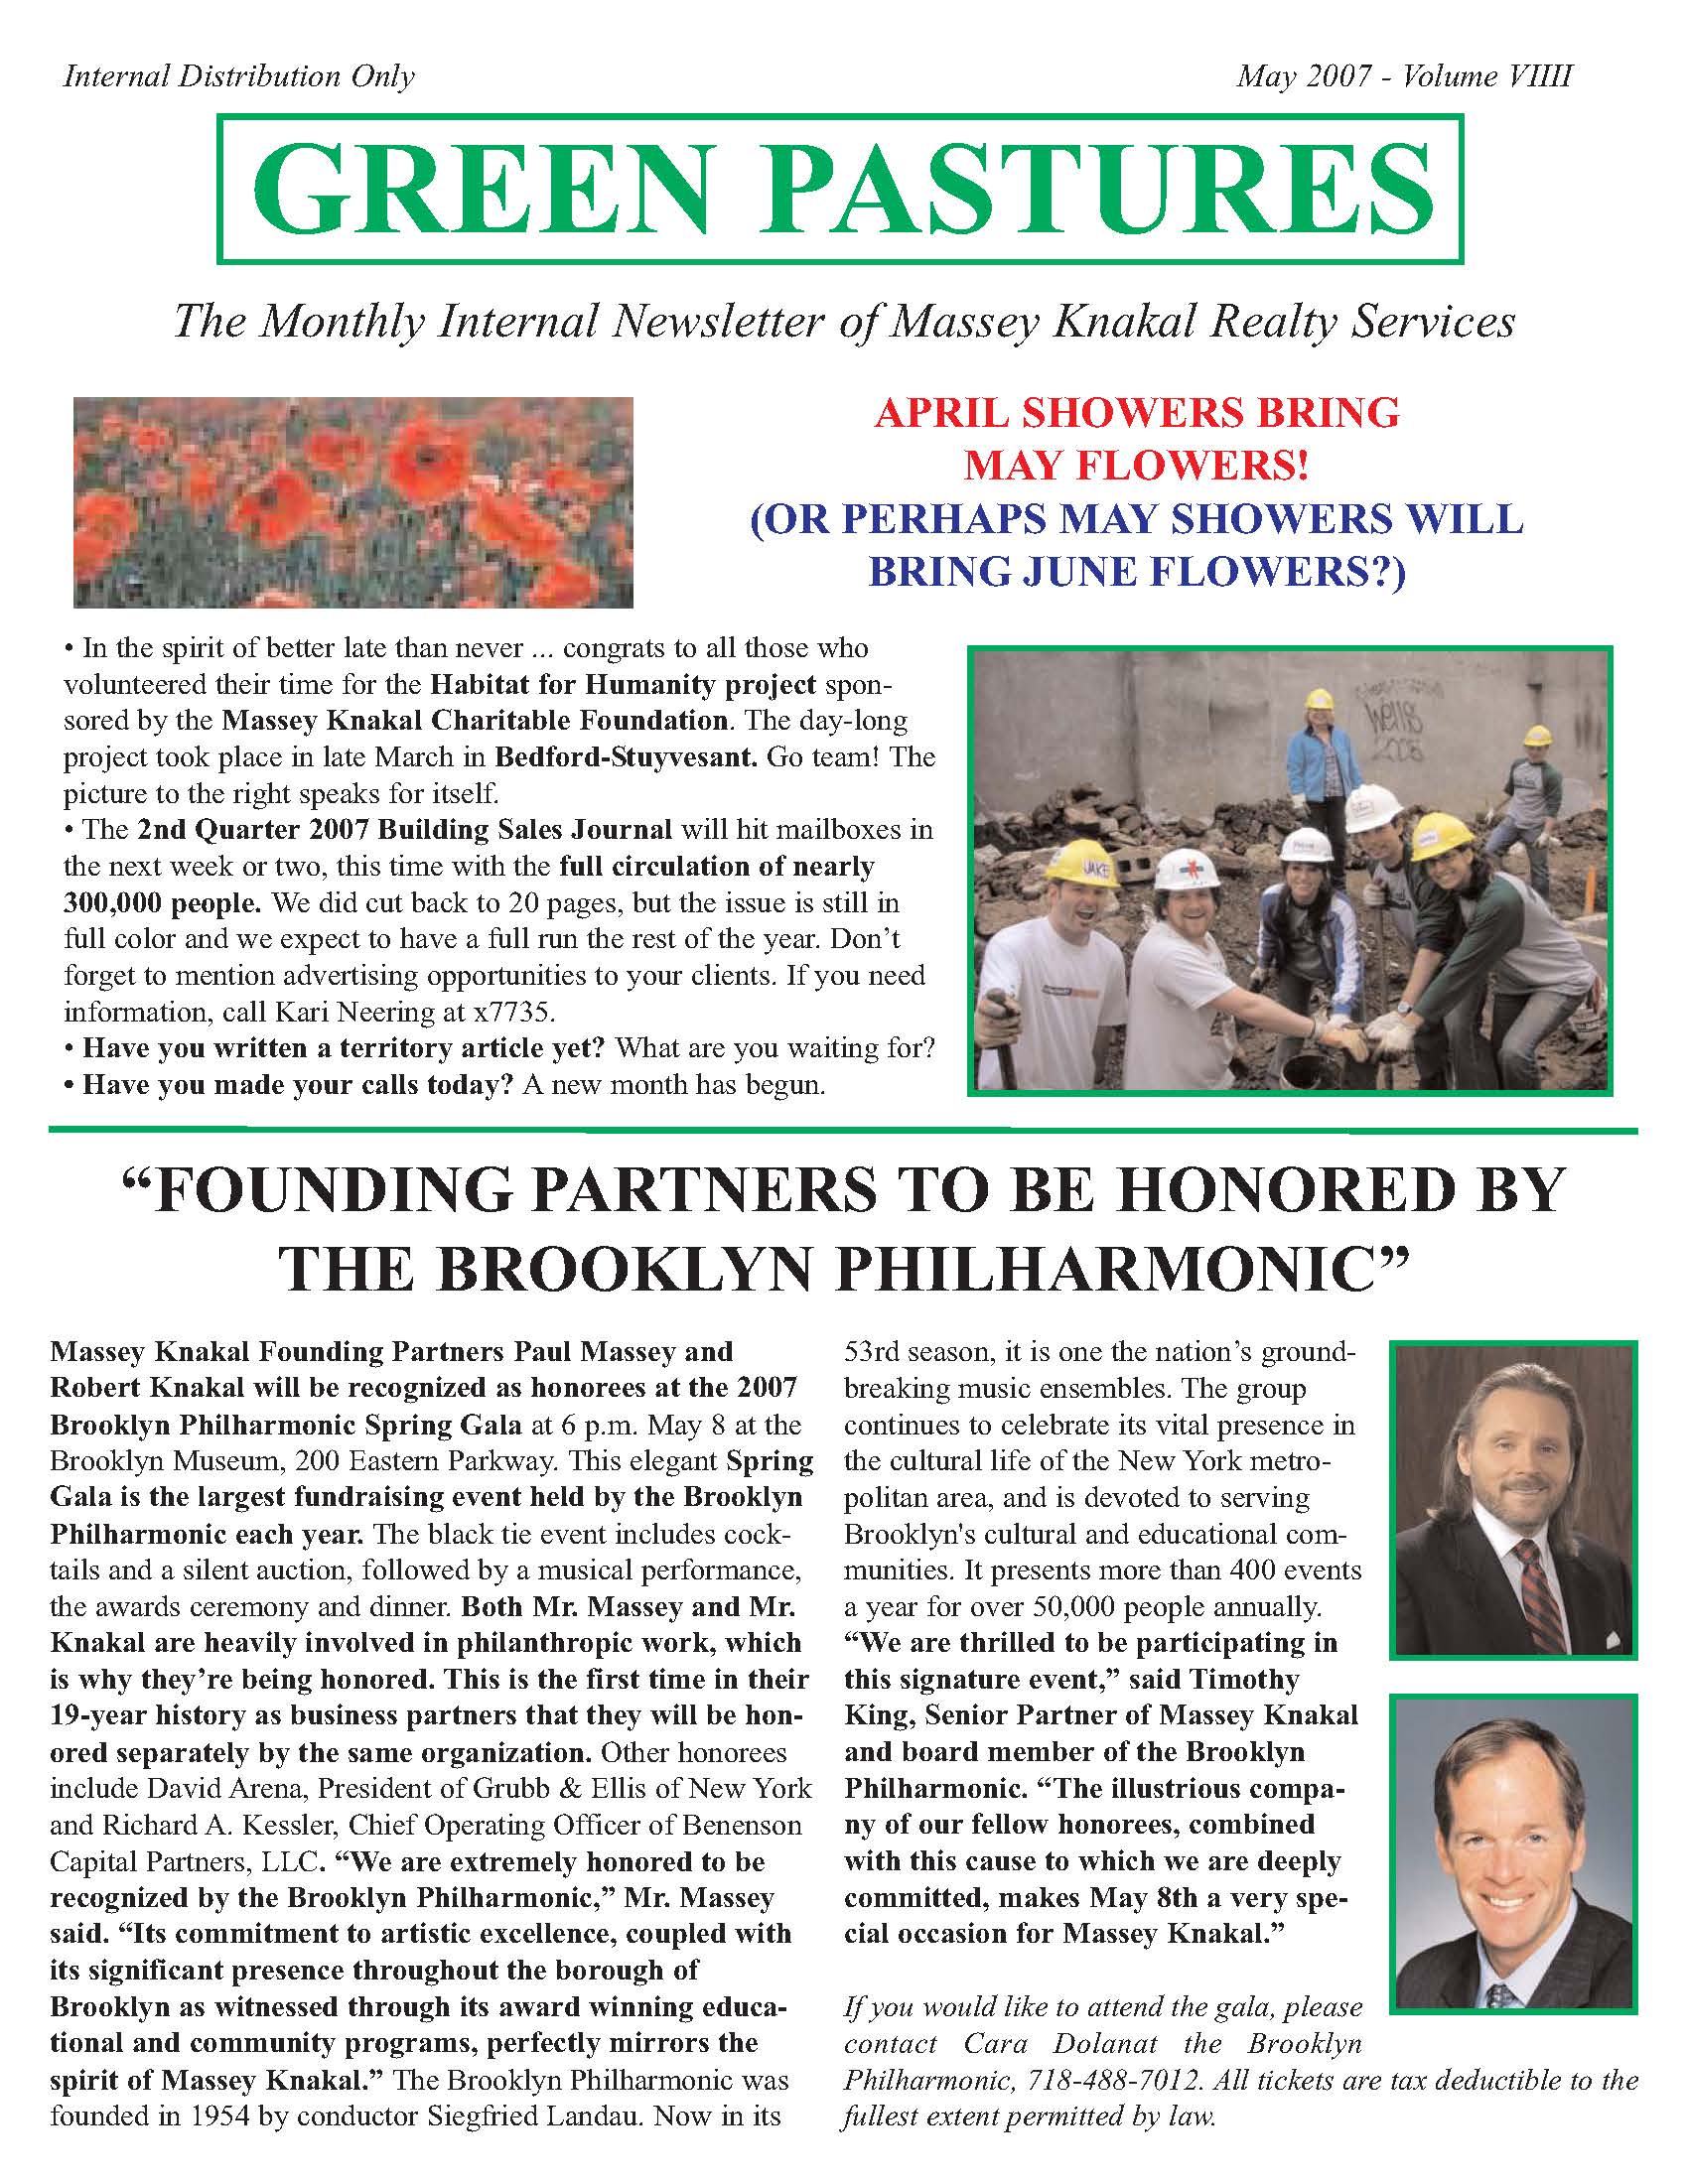 May 2007 Internal Newsletter_Page_1